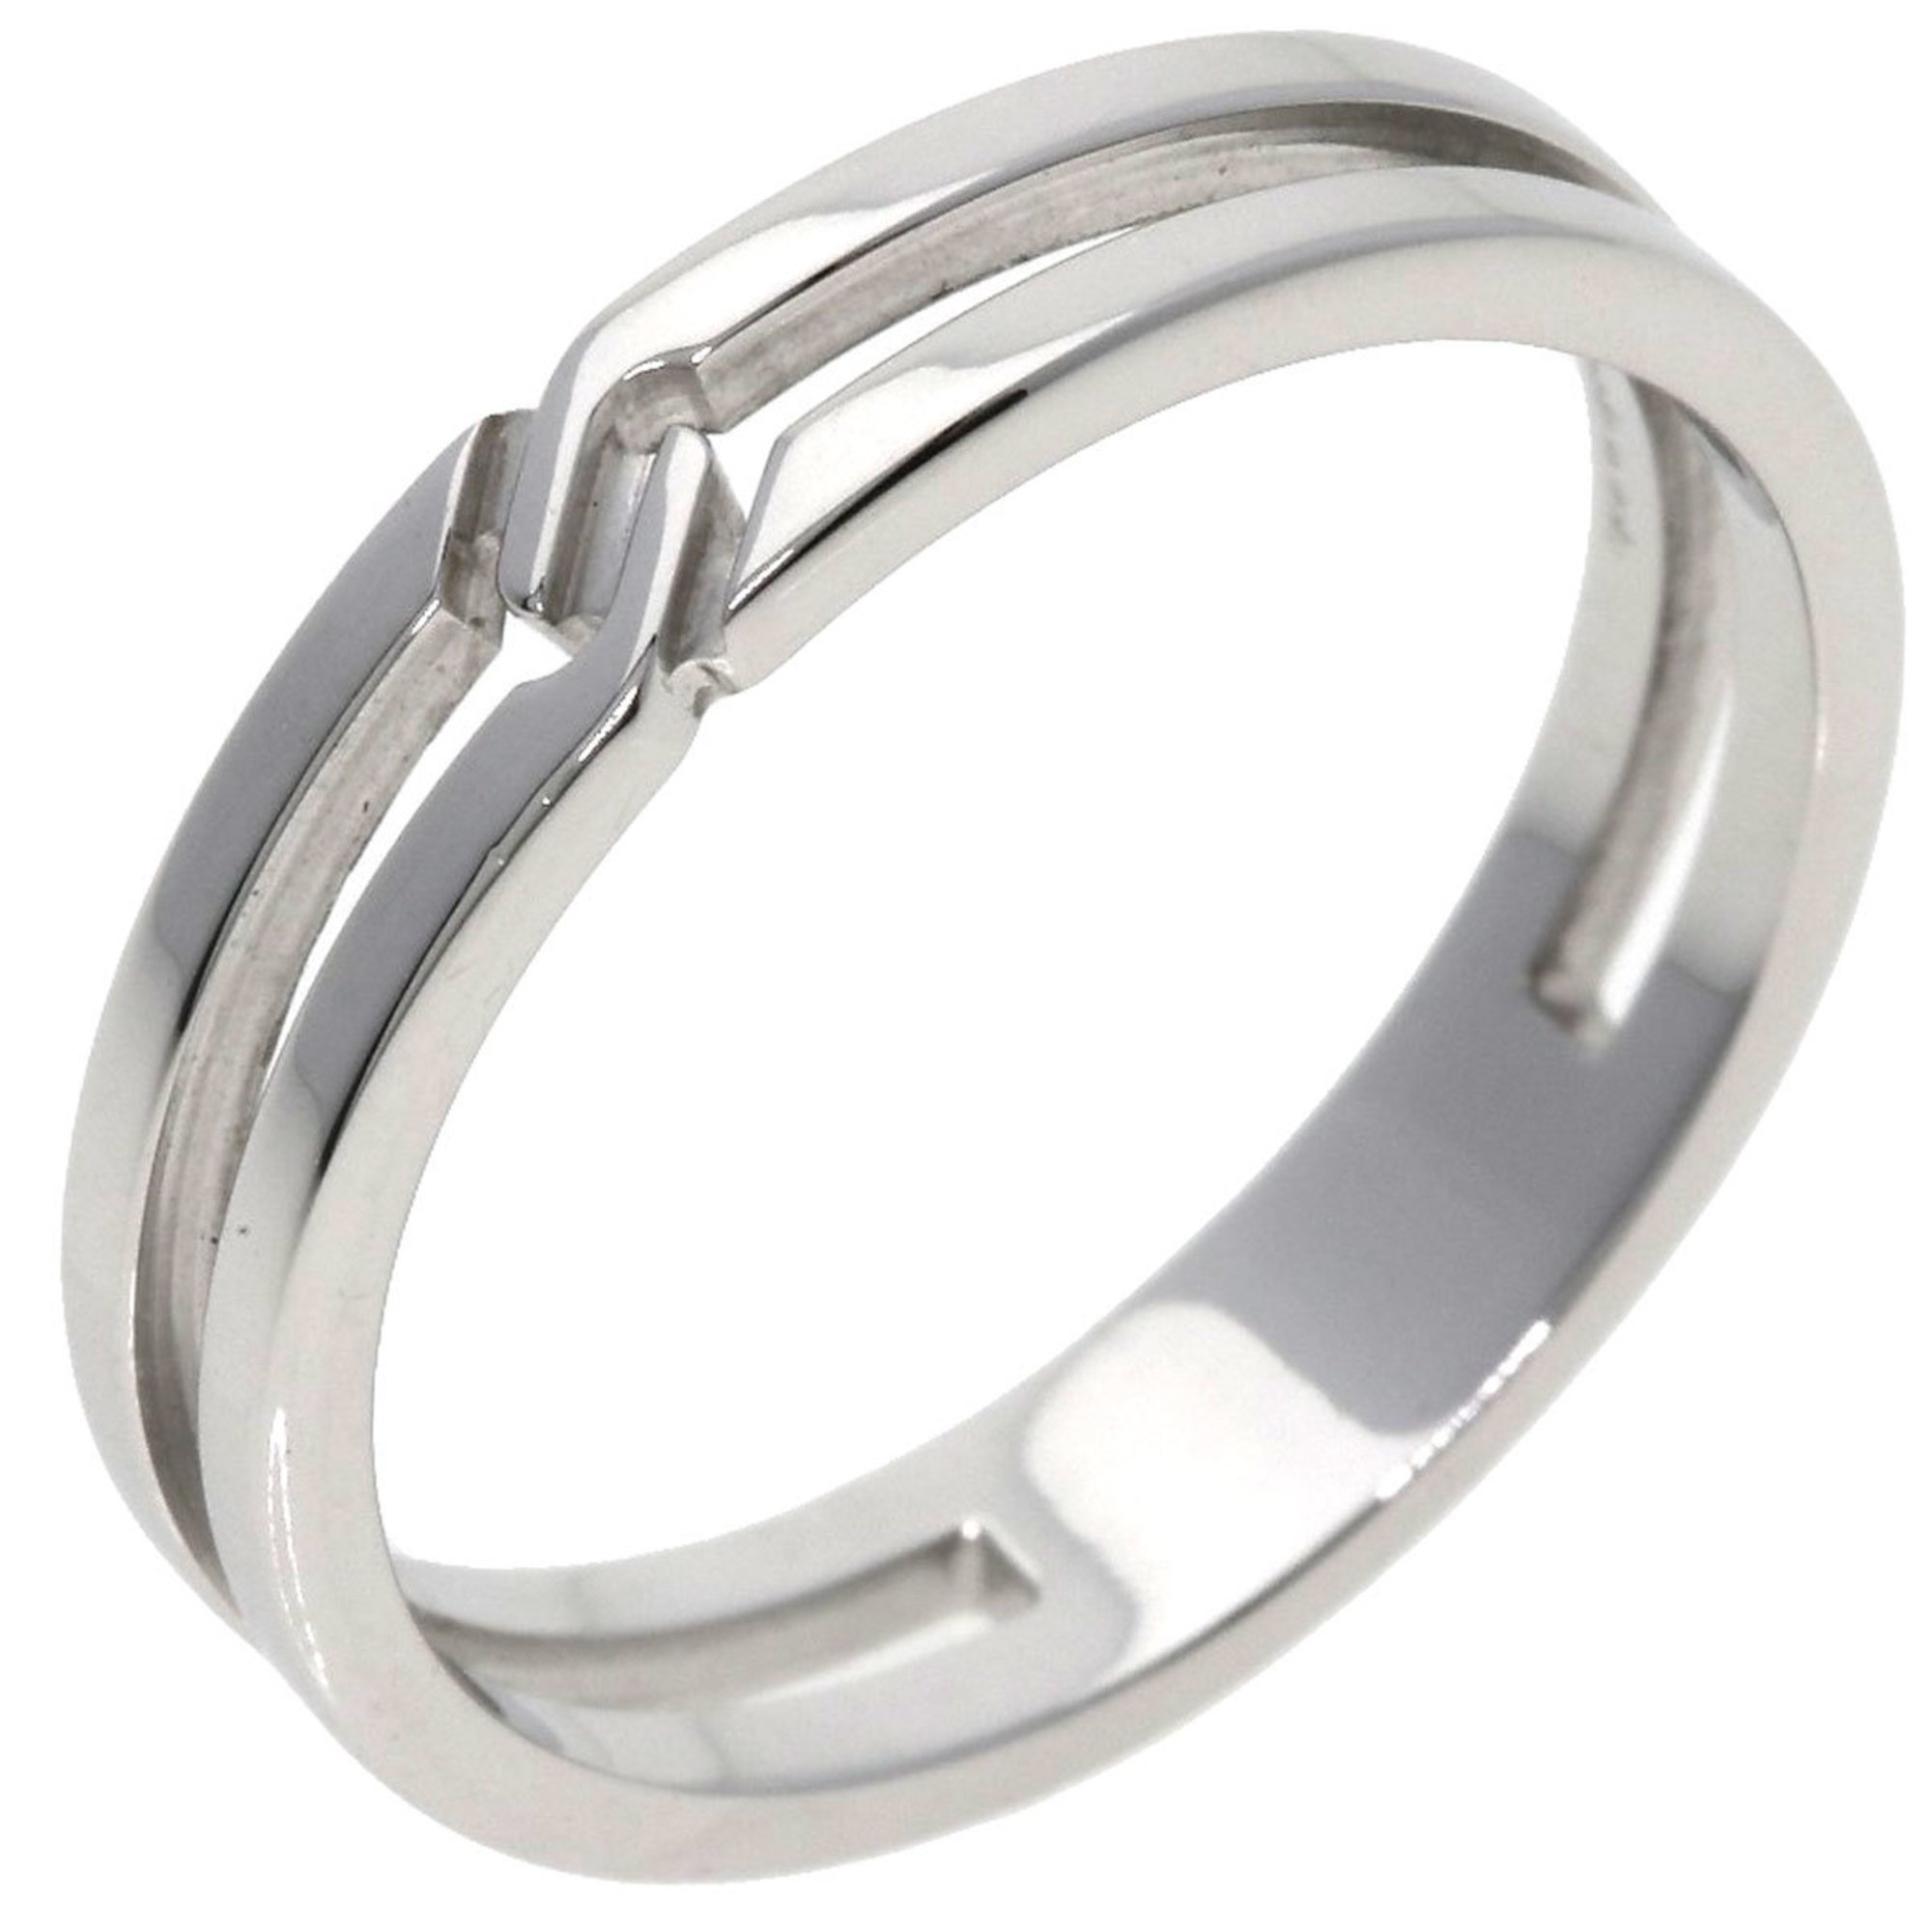 Gucci Infinity #14 Ring, 18K White Gold, Women's, GUCCI